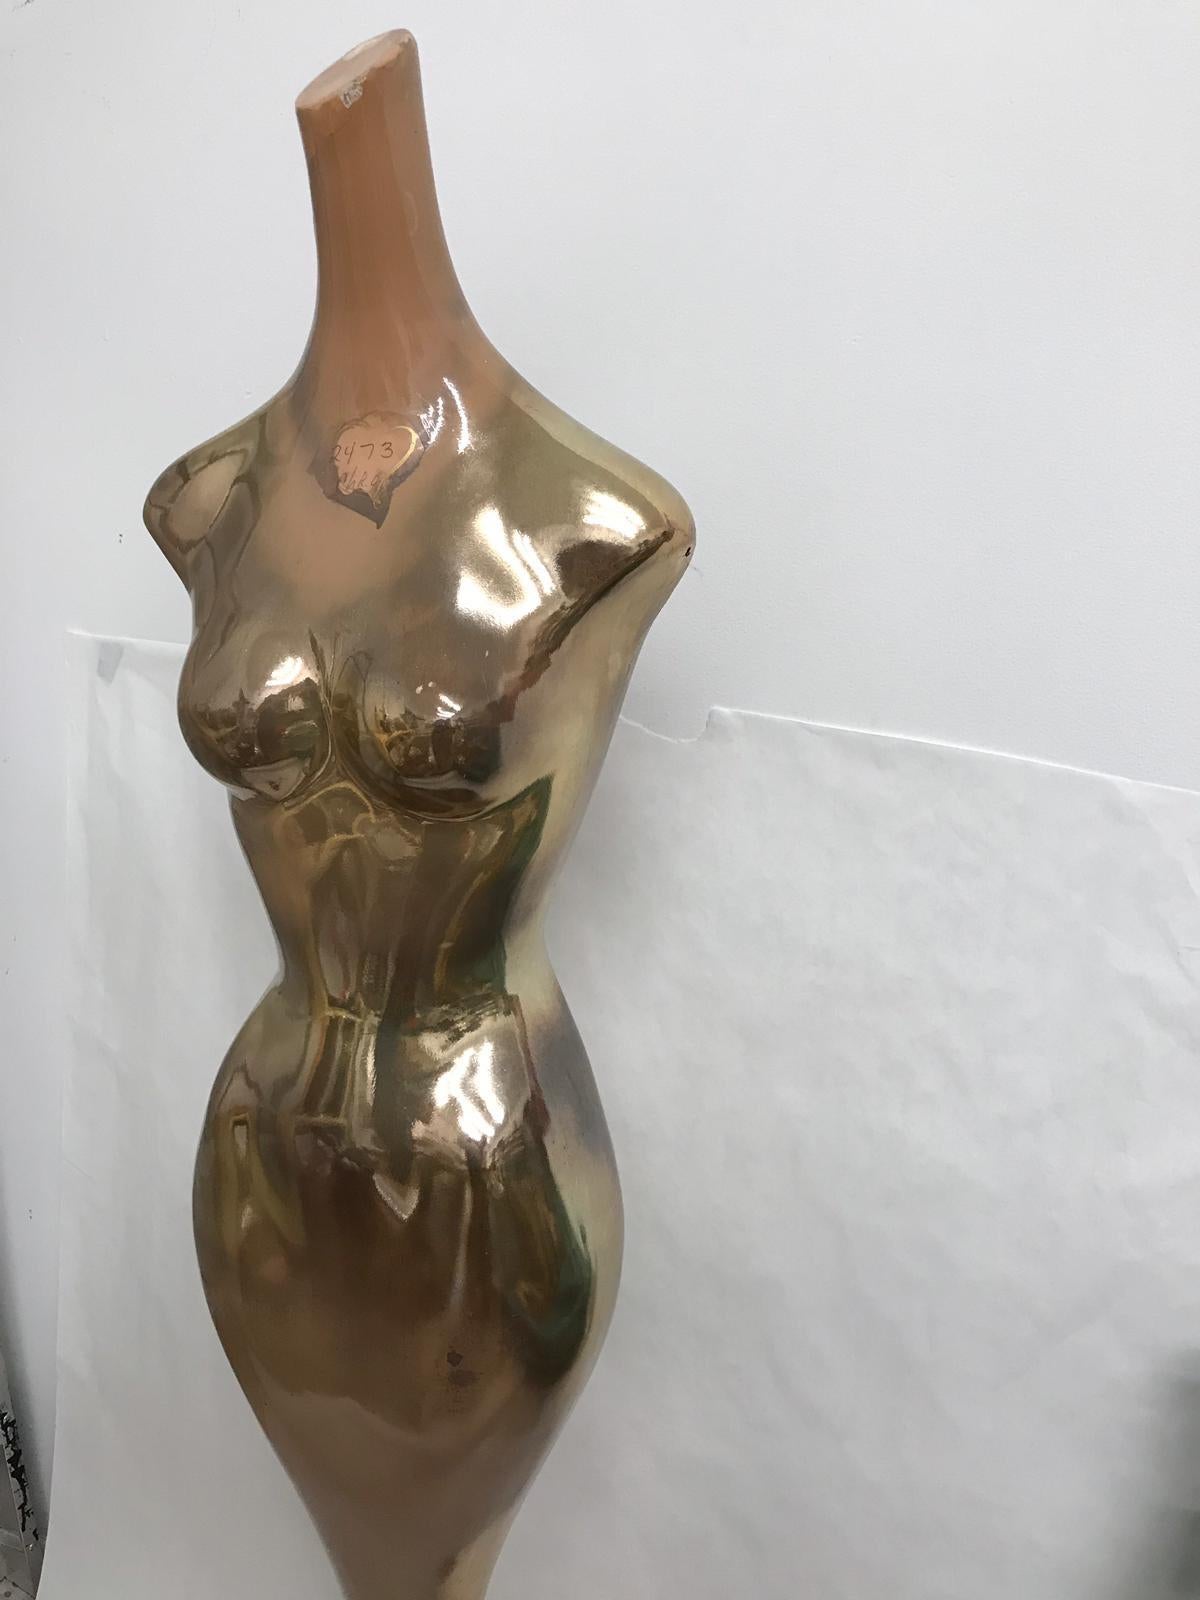 This is an amazing Full floor length mercury finish department store Mannequin from approximately 1950-1960. Extremely well constructed feminine figural sculpture/mannequin.